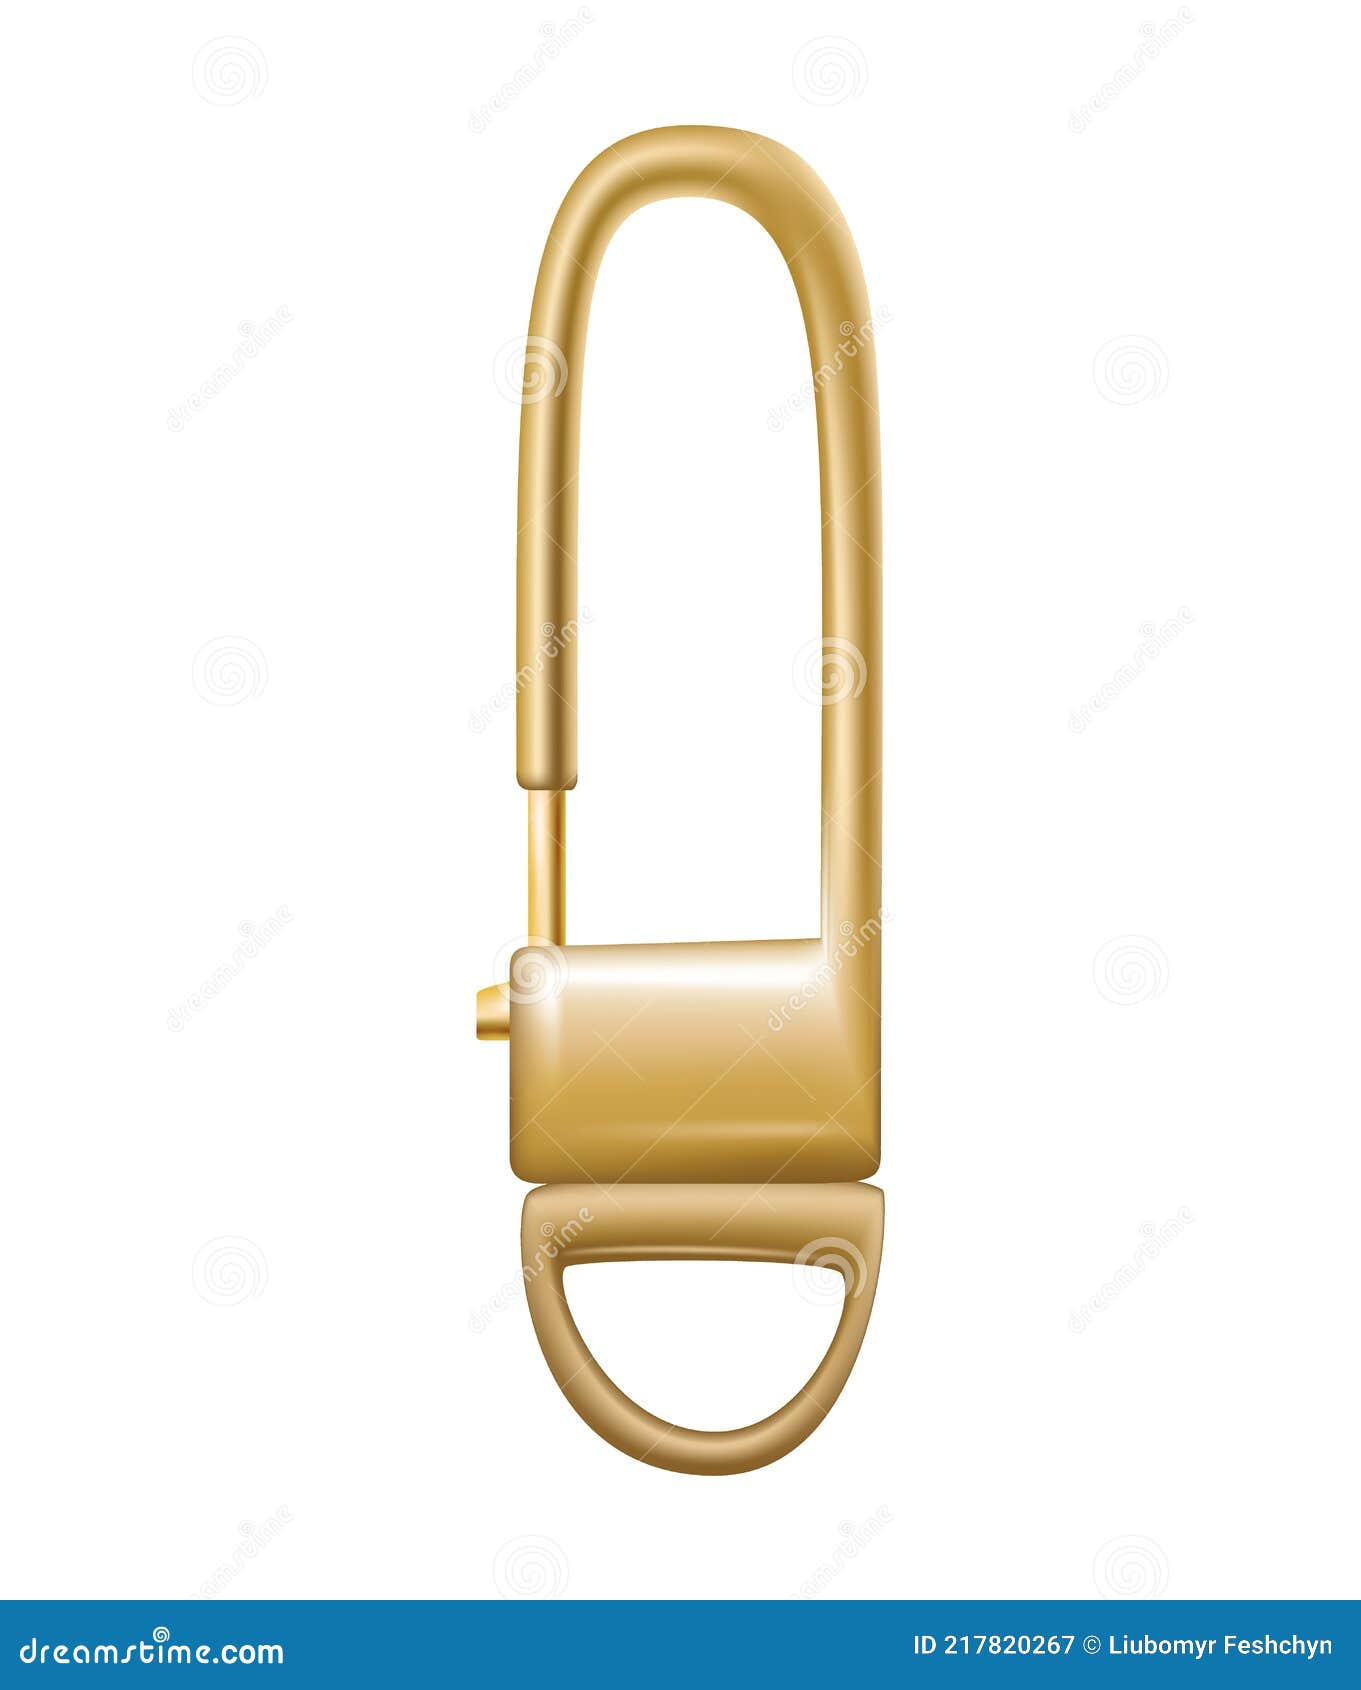 carabiner clasp. metal carabine for climbing rope link. snap hook for bag, safety or protecting accessory. claw clasp